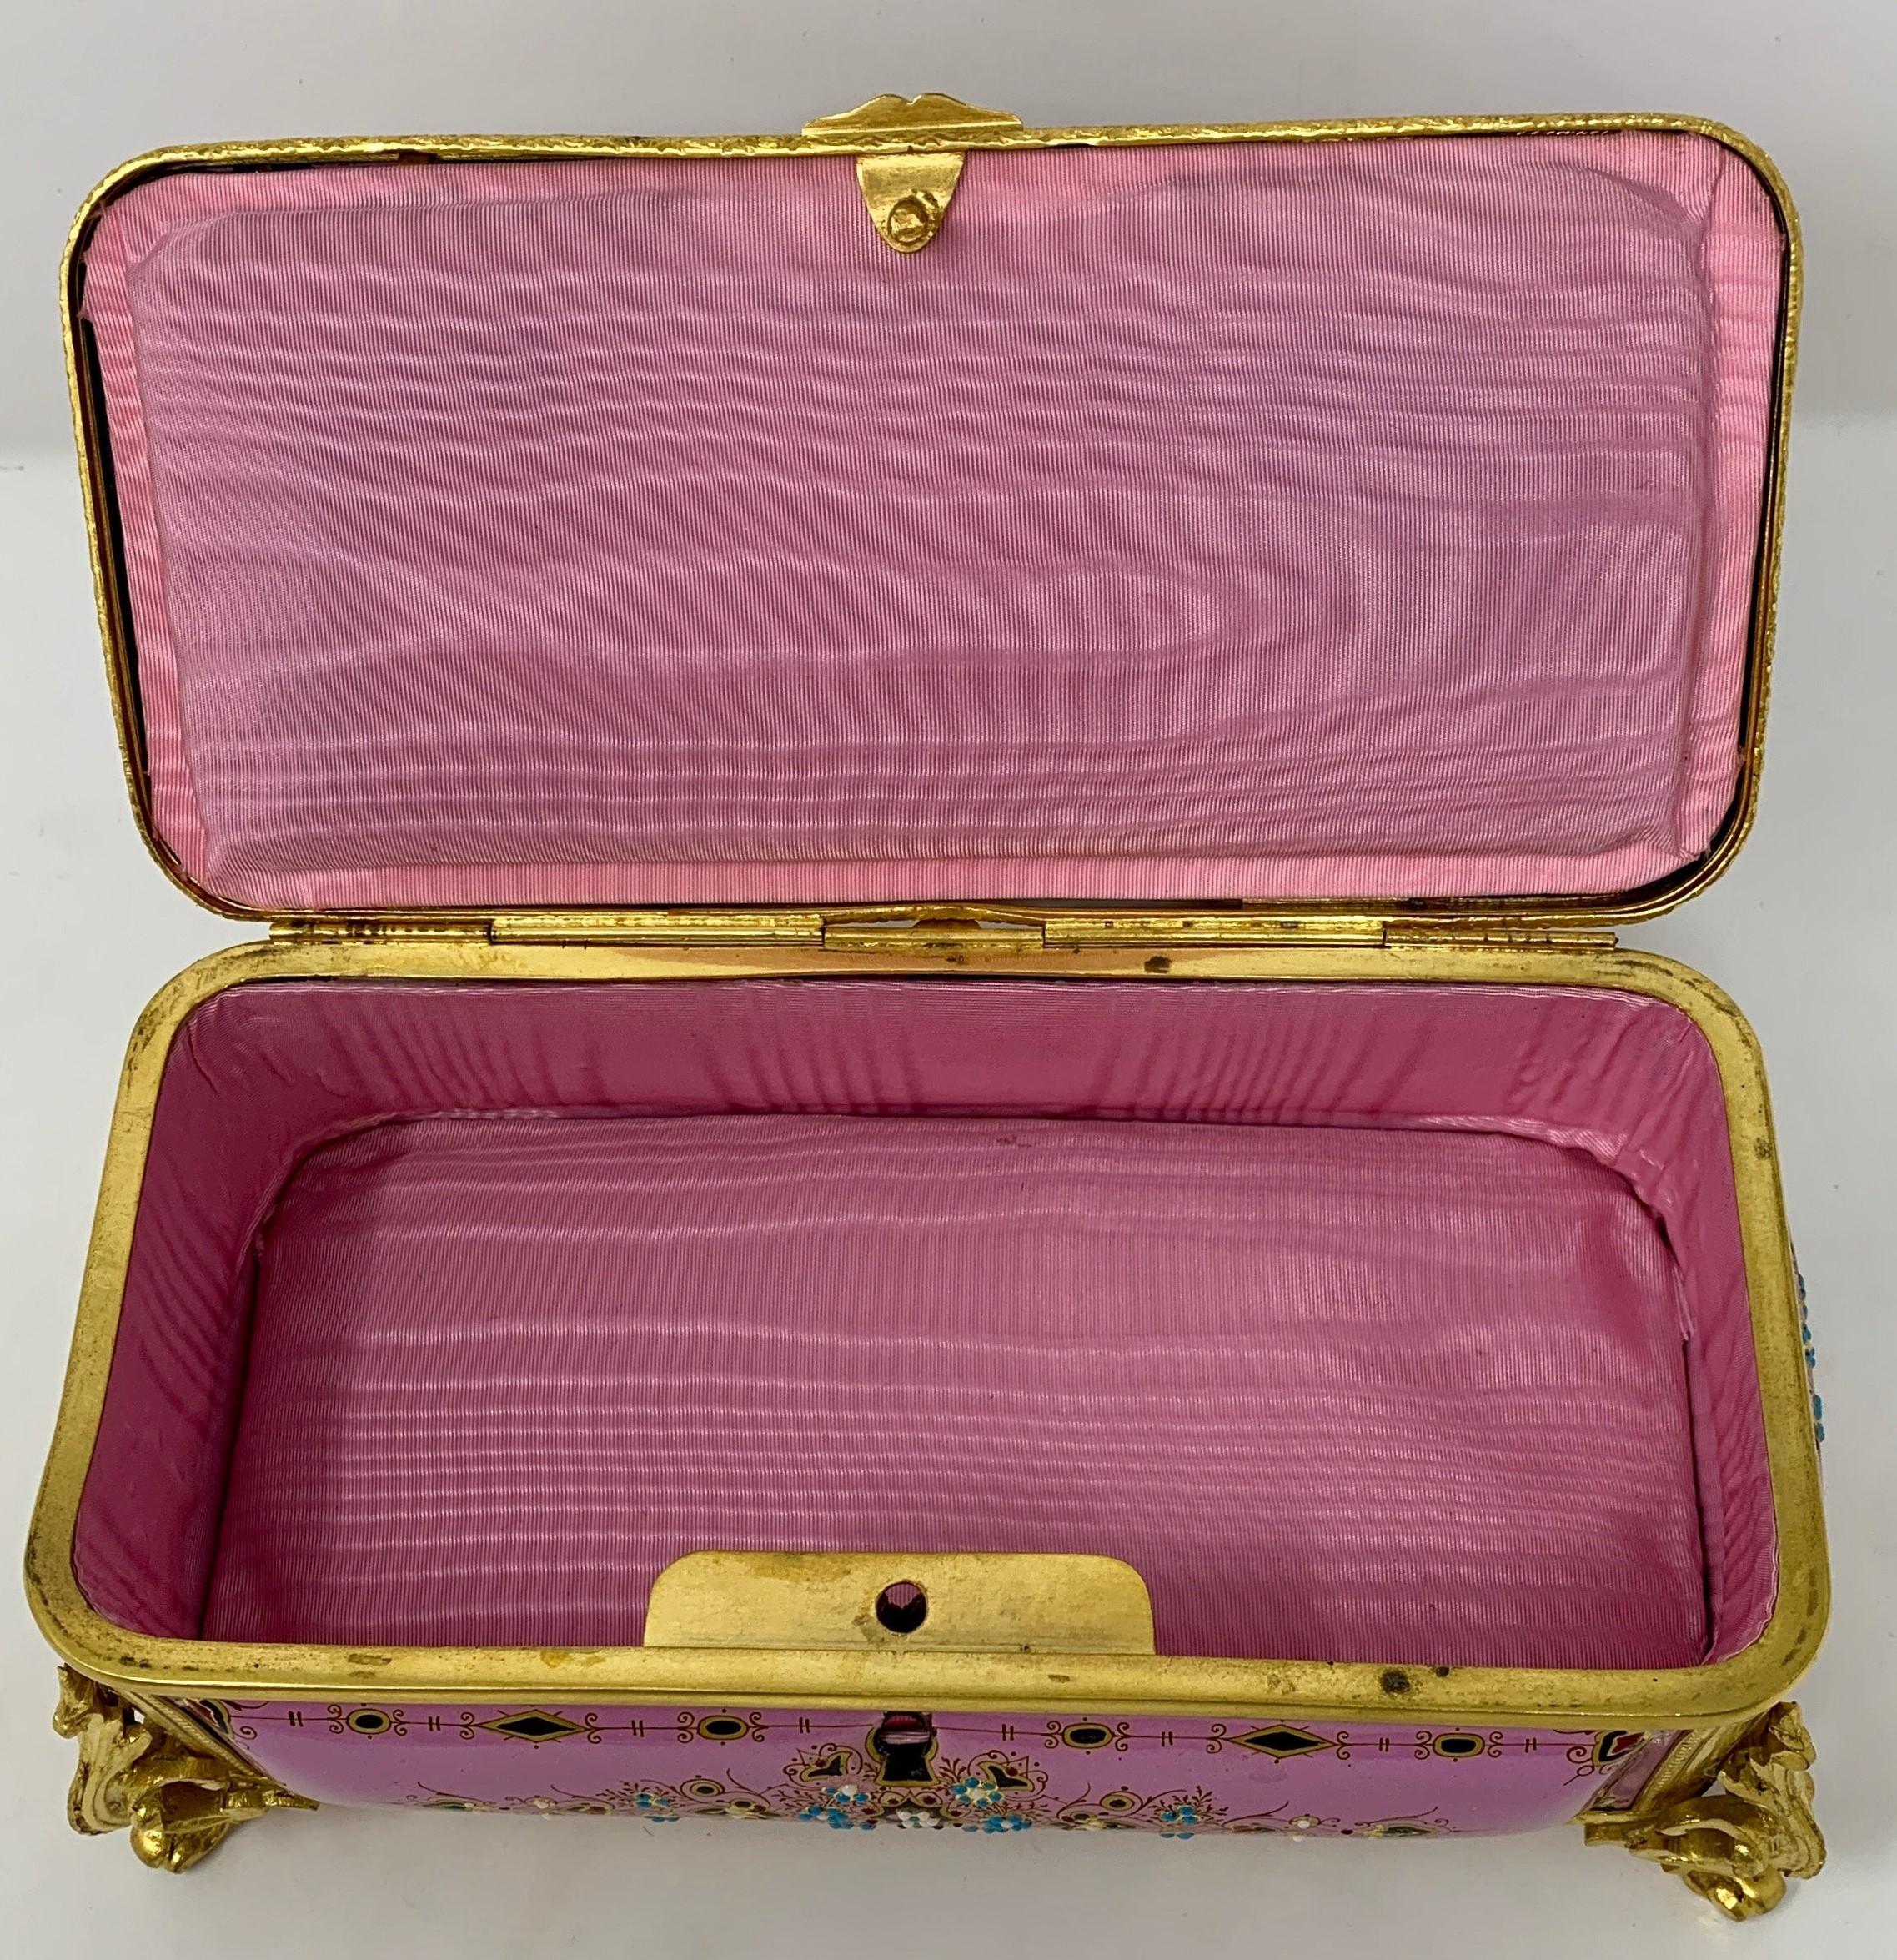 Antique French Pink Enameled Ormolu Box, circa 1860-1870 In Good Condition For Sale In New Orleans, LA